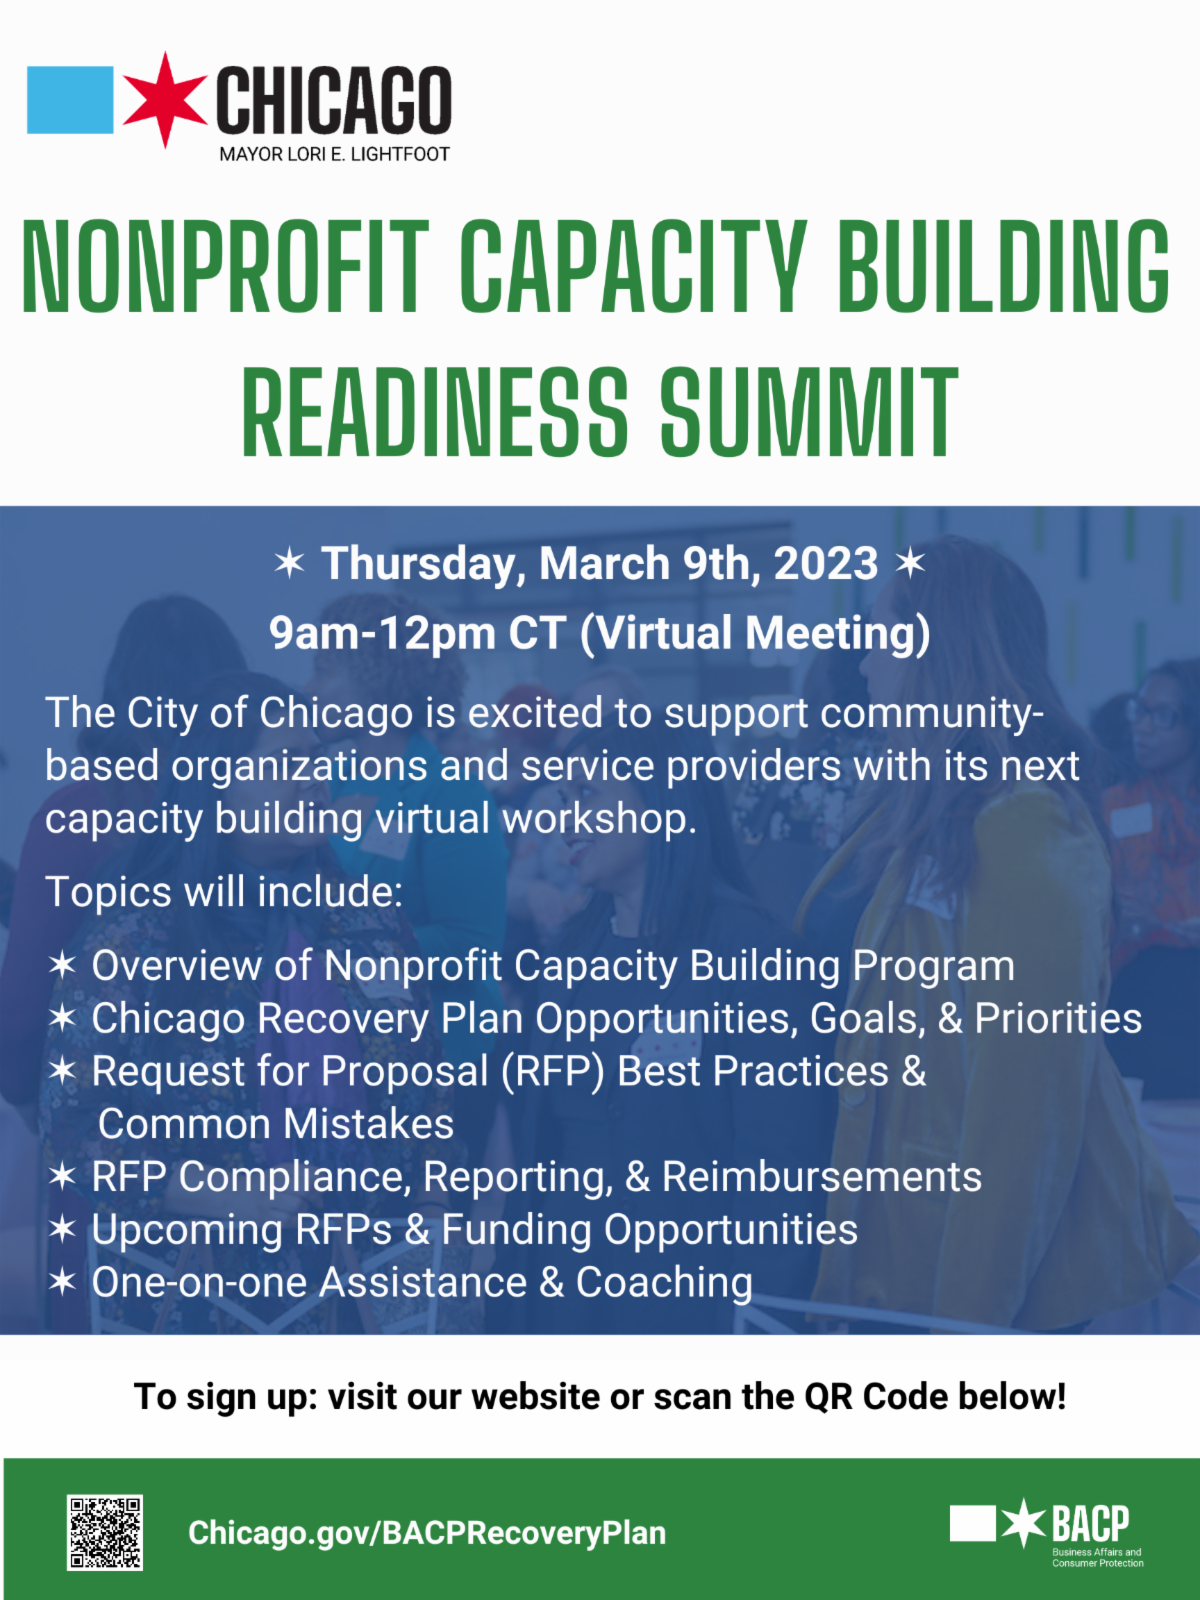 Flyer for NPO Capacity Building readiness Summit listing March 9th, 2023 9am-12pm CT virtually